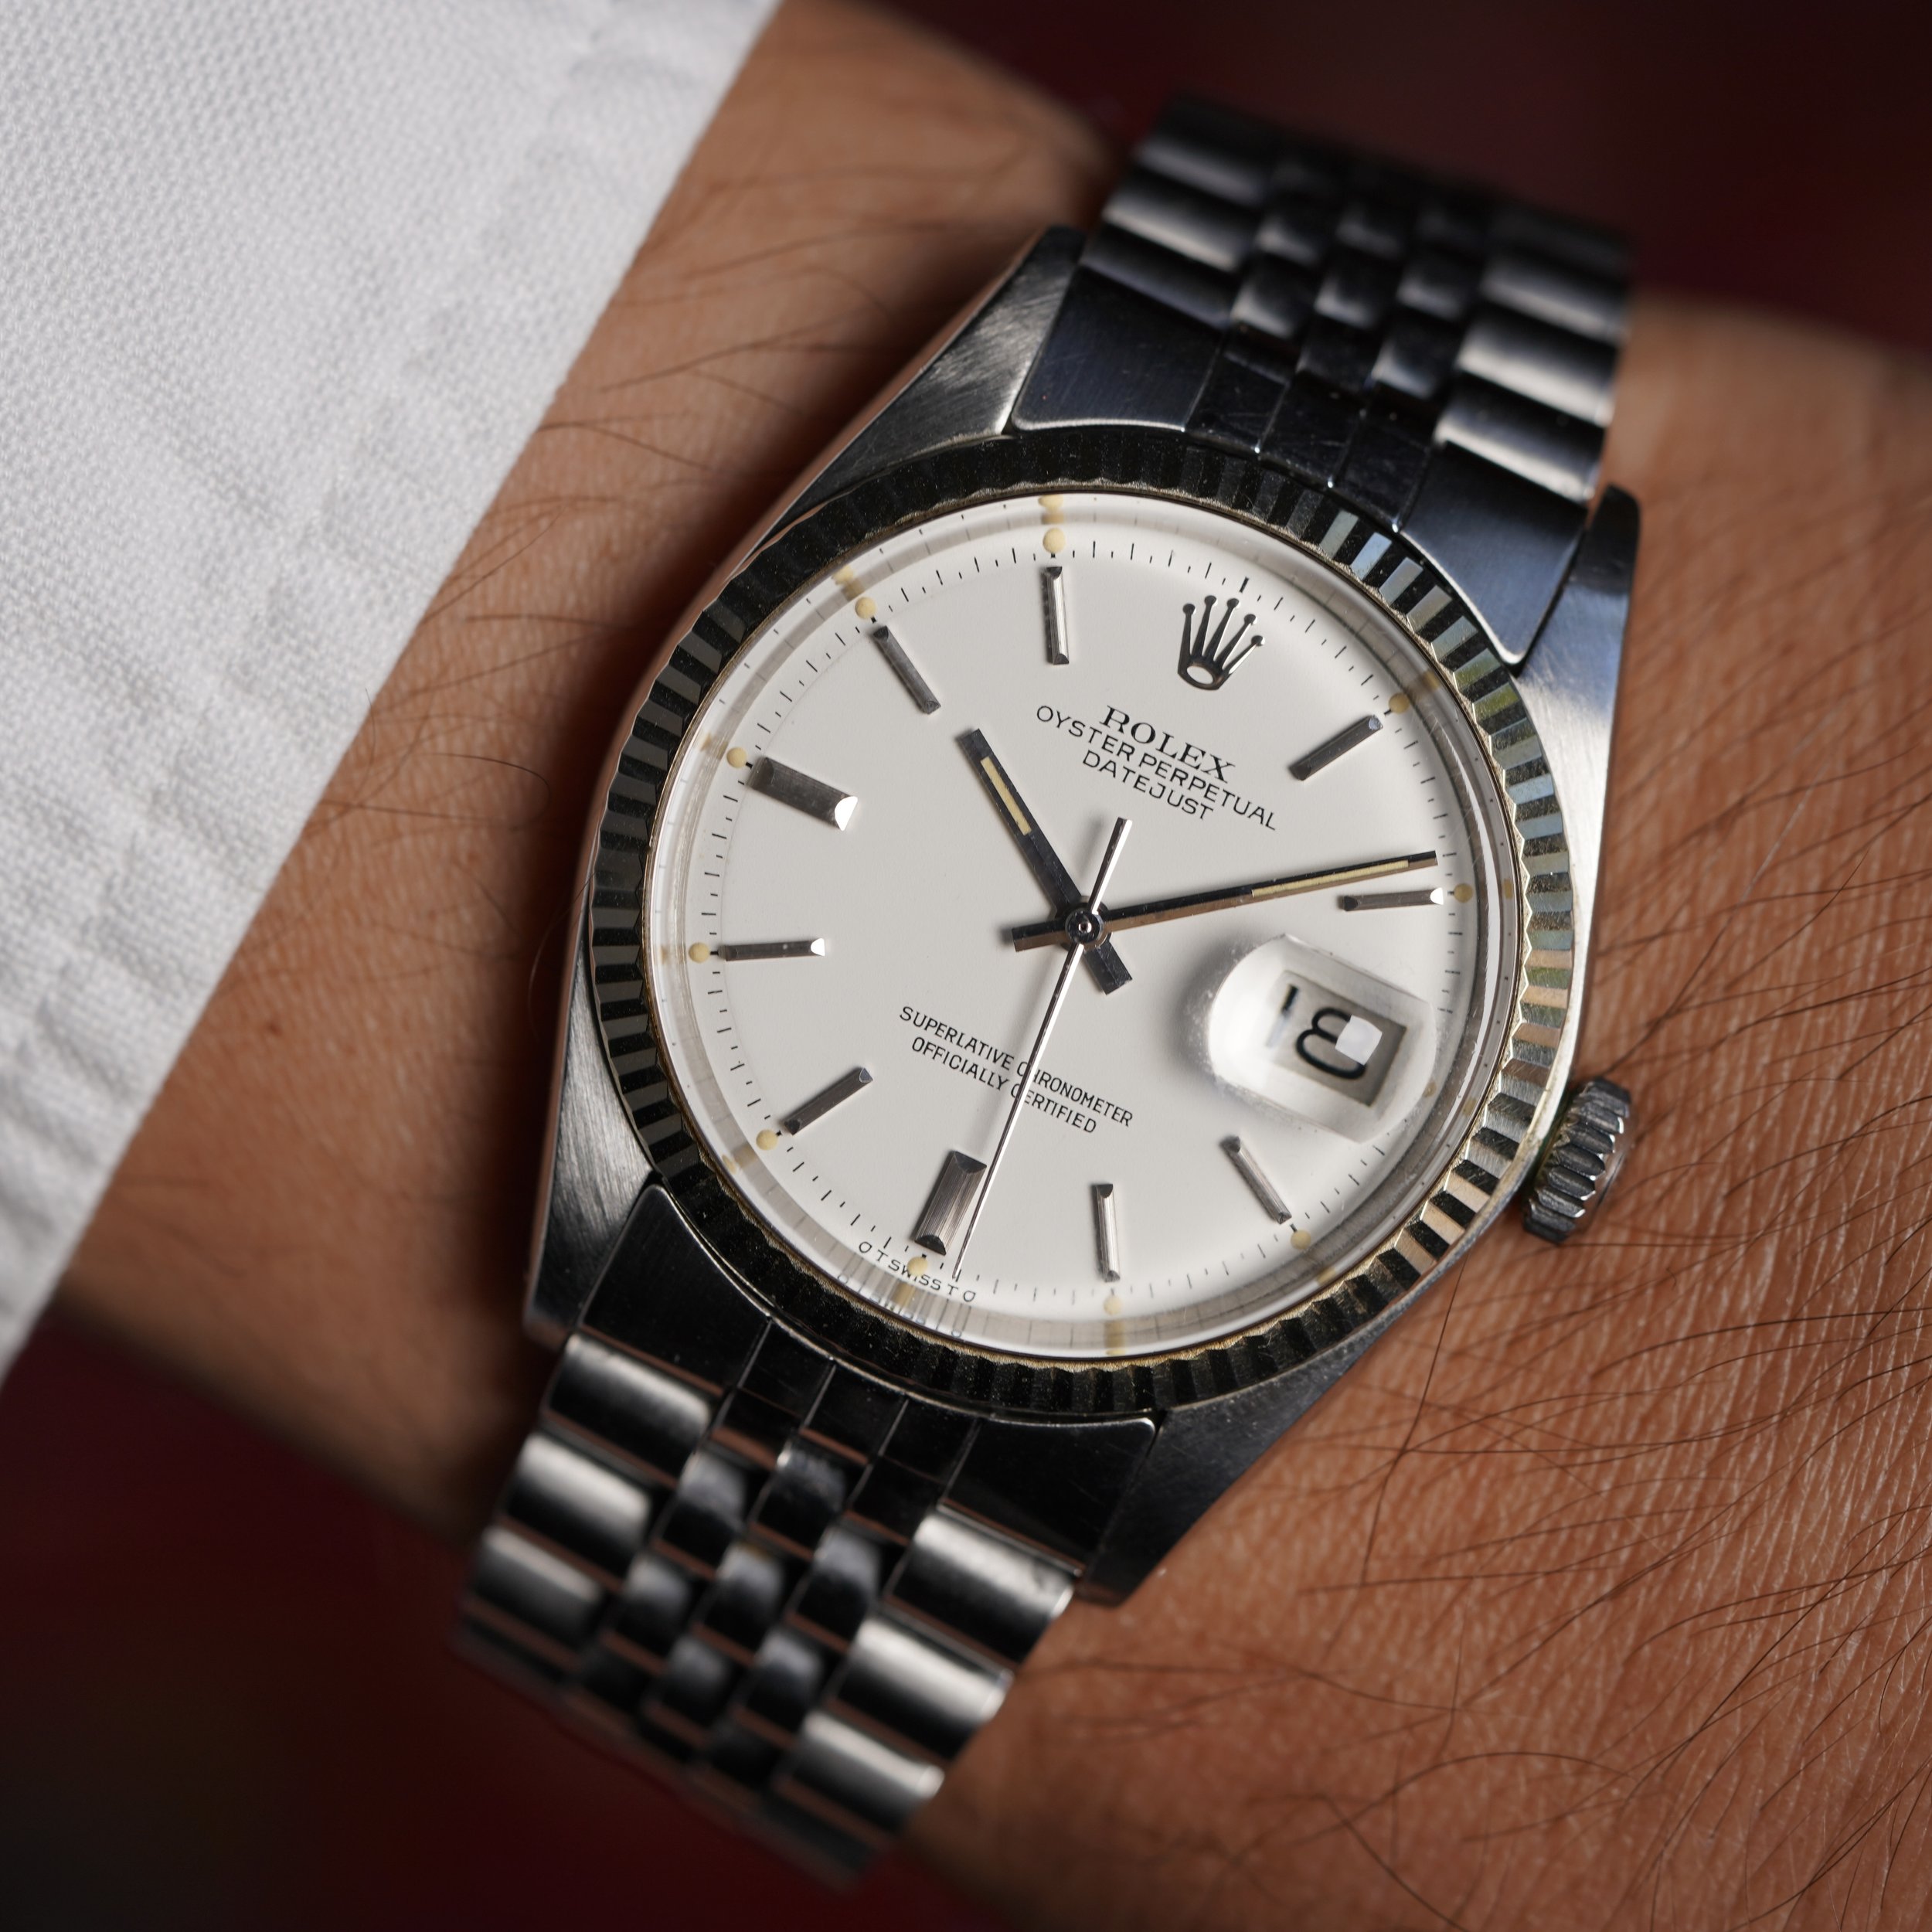  Rolex White Matte Dial Datejust Reference 1601 Unpolished